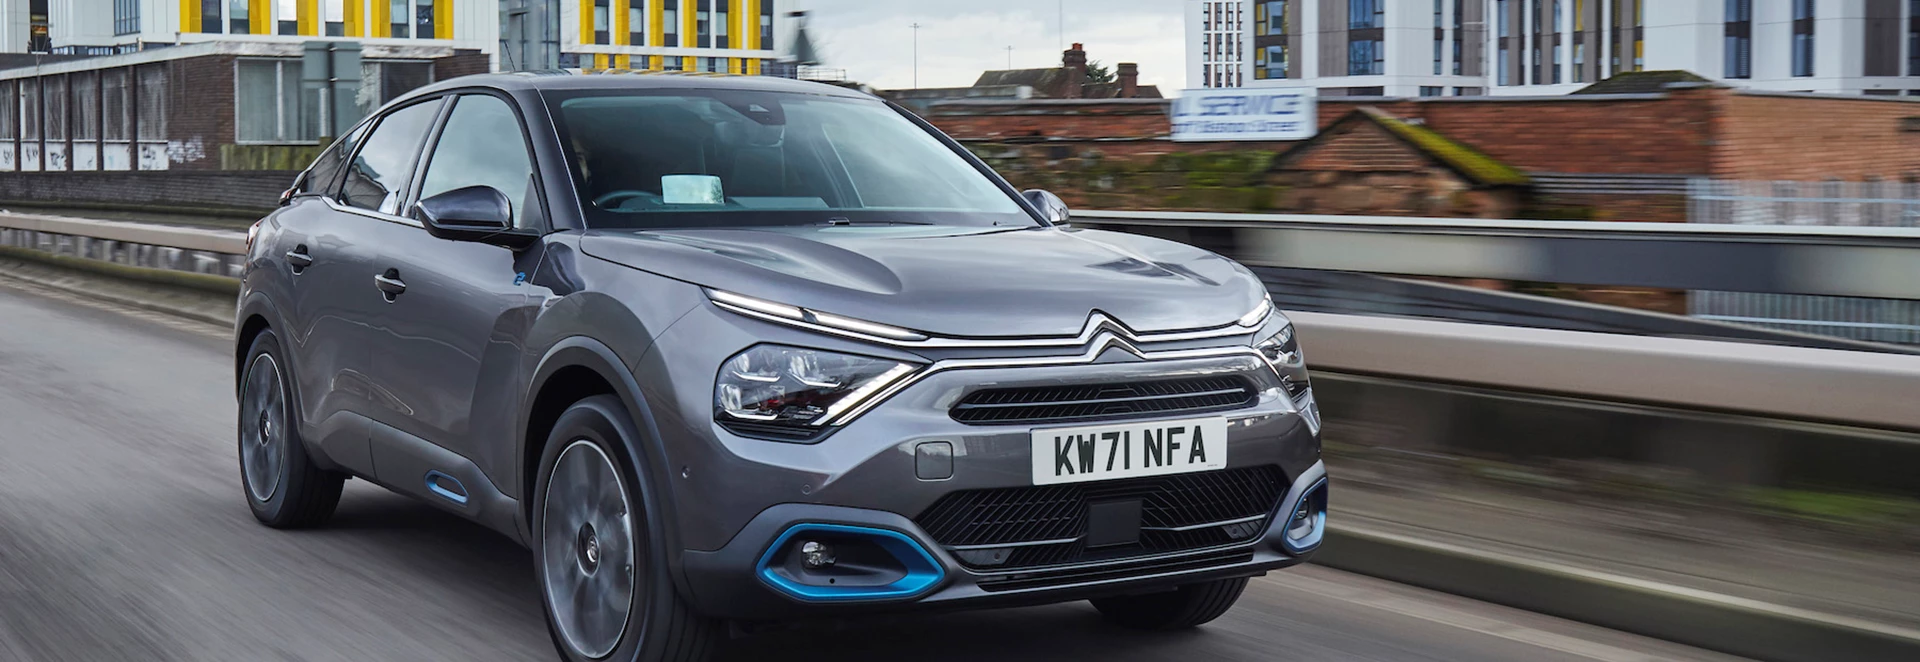 Citroen announces special offers for British Sign Language users 